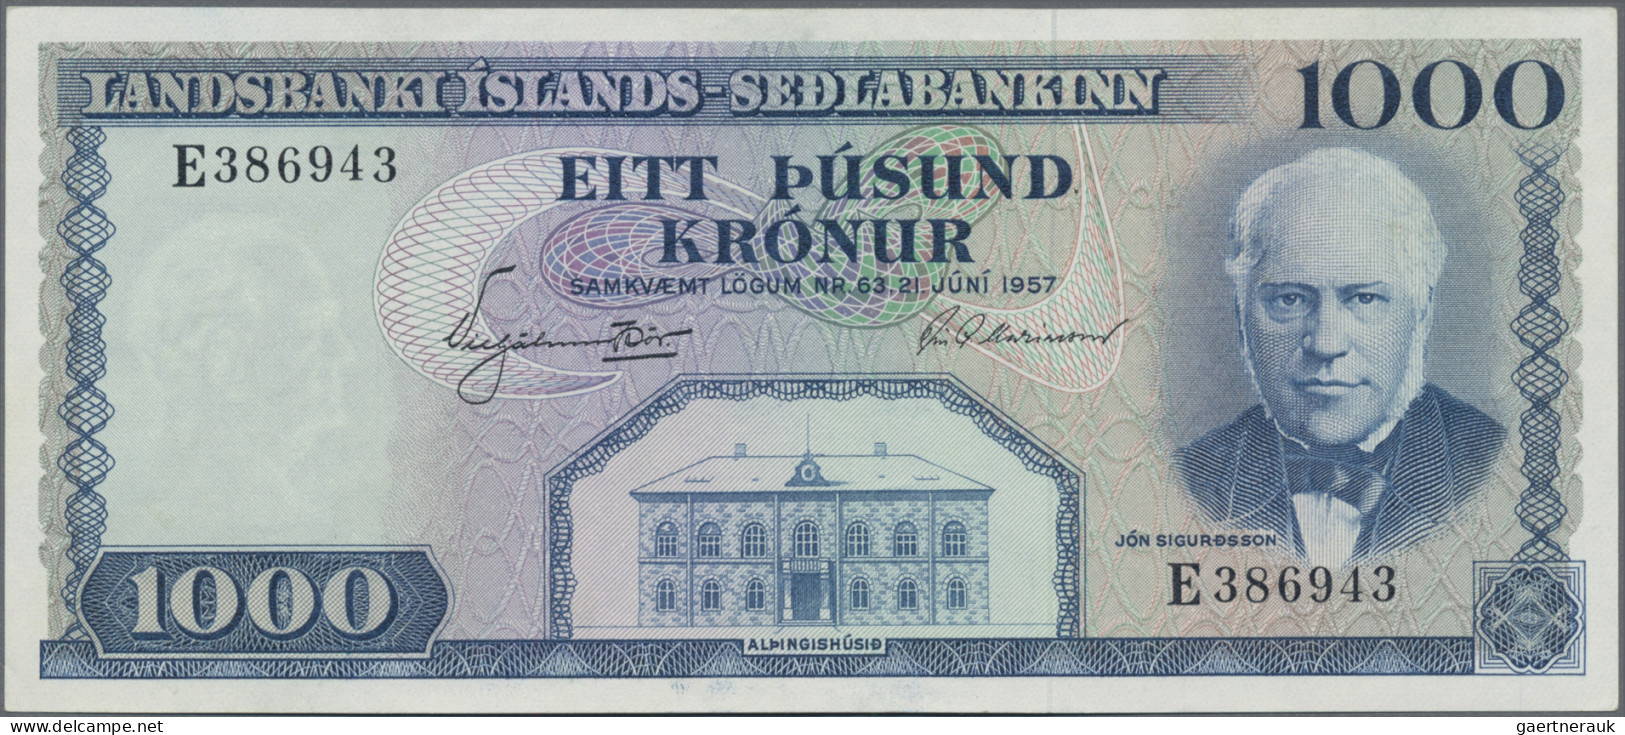 Iceland: Treasury and State Bank of Iceland, lot with 4 banknotes, series 1941,